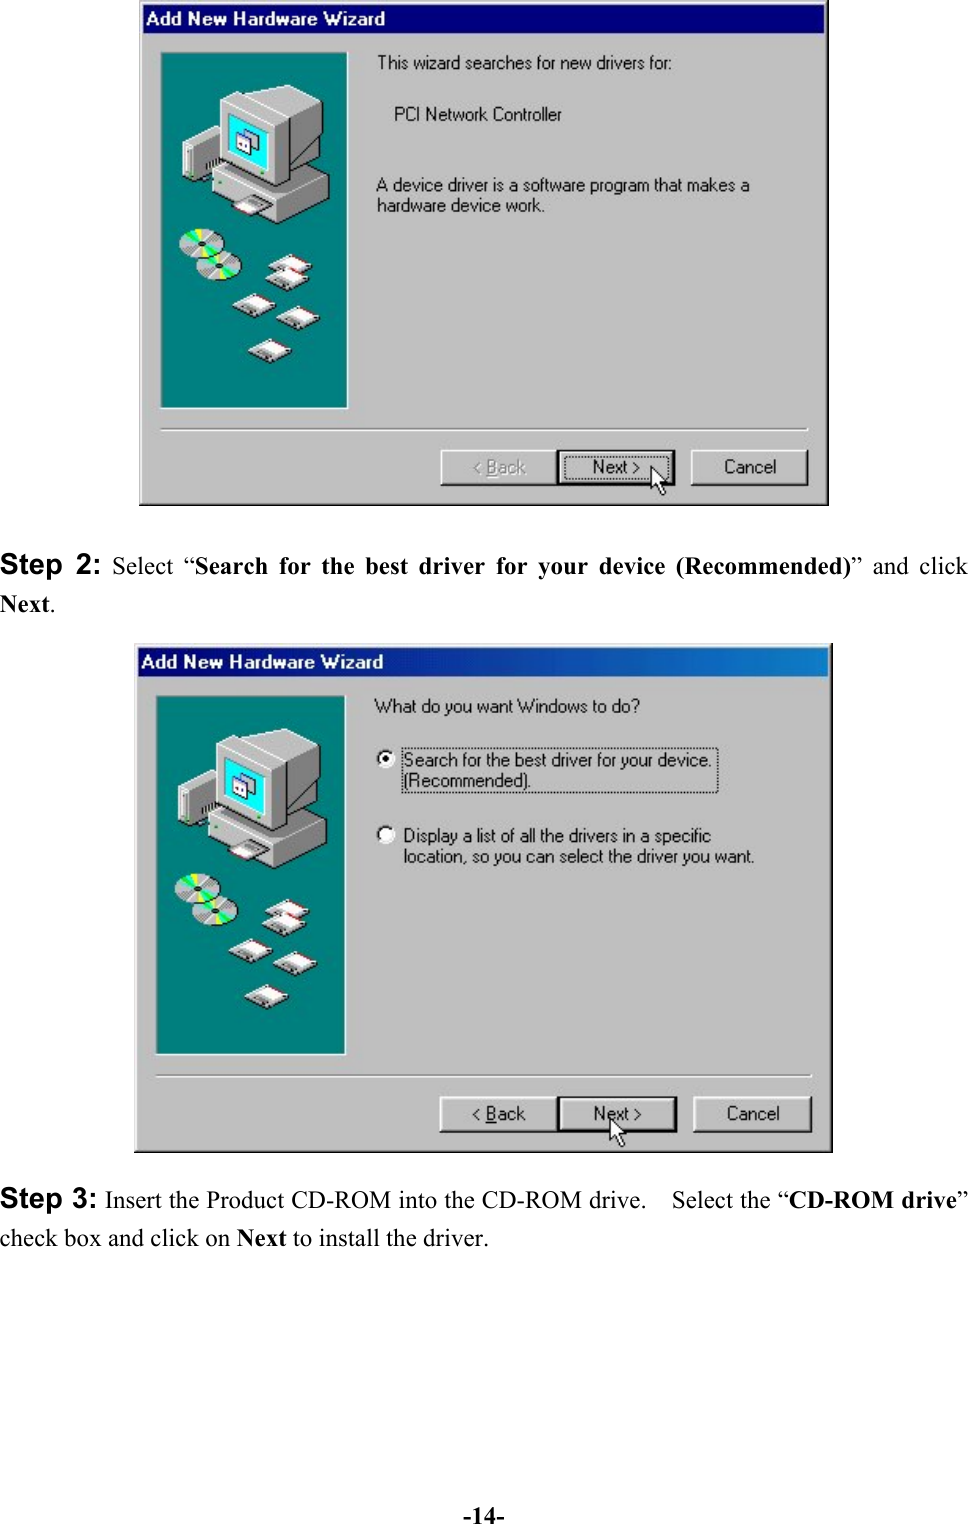 -14-Step 2: Select “Search for the best driver for your device (Recommended)” and clickNext.Step 3: Insert the Product CD-ROM into the CD-ROM drive.    Select the “CD-ROM drive”check box and click on Next to install the driver.